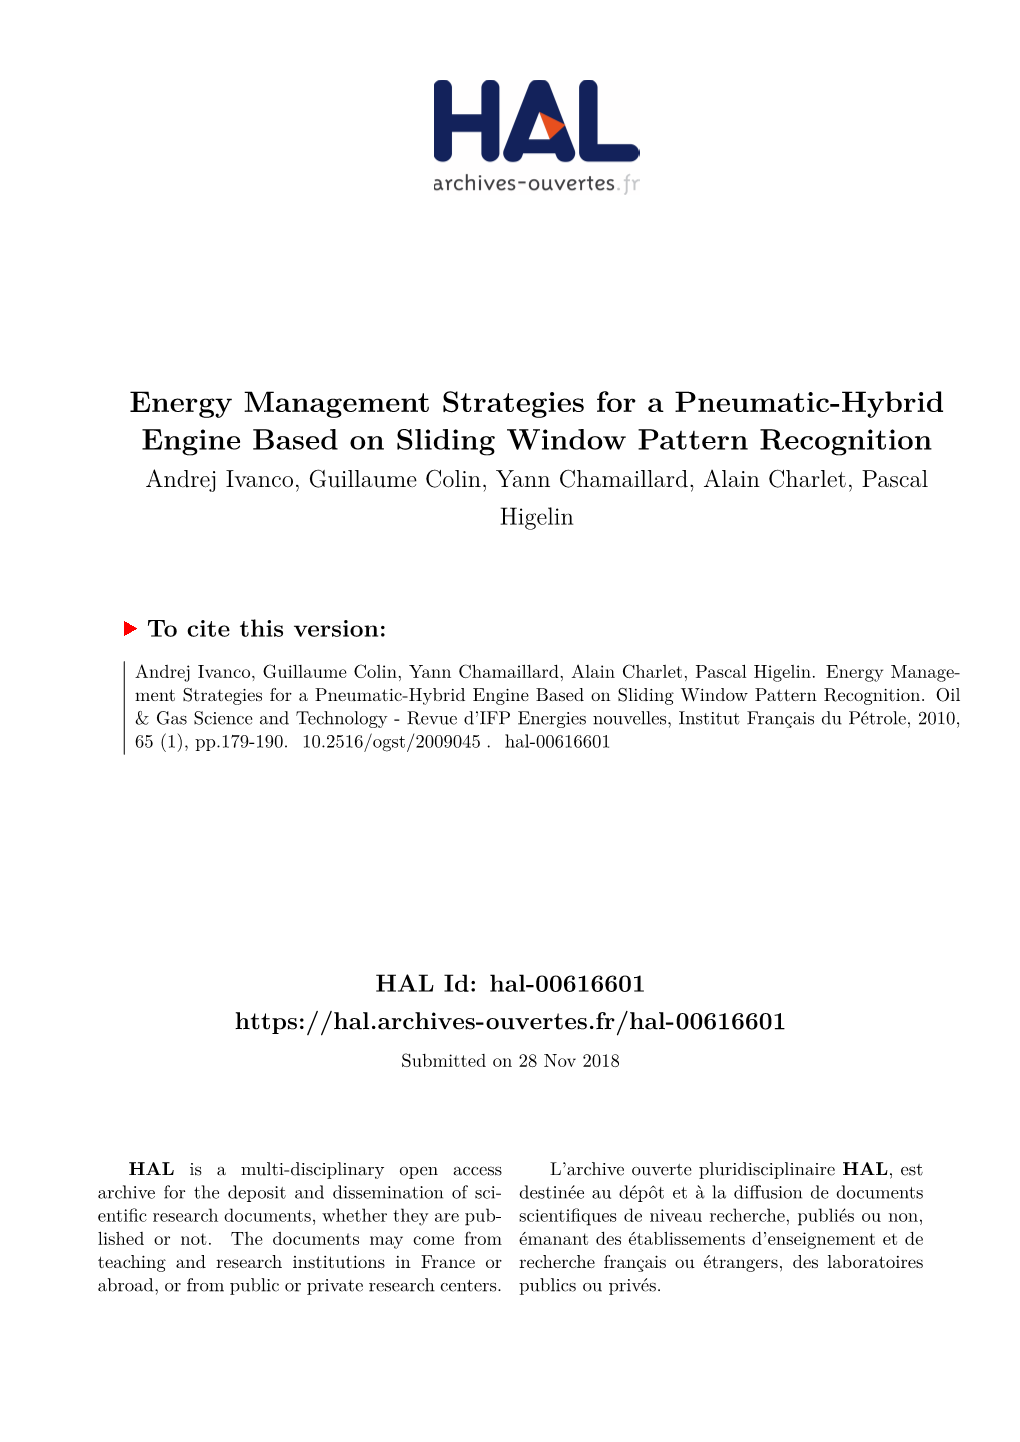 Energy Management Strategies for a Pneumatic-Hybrid Engine Based On